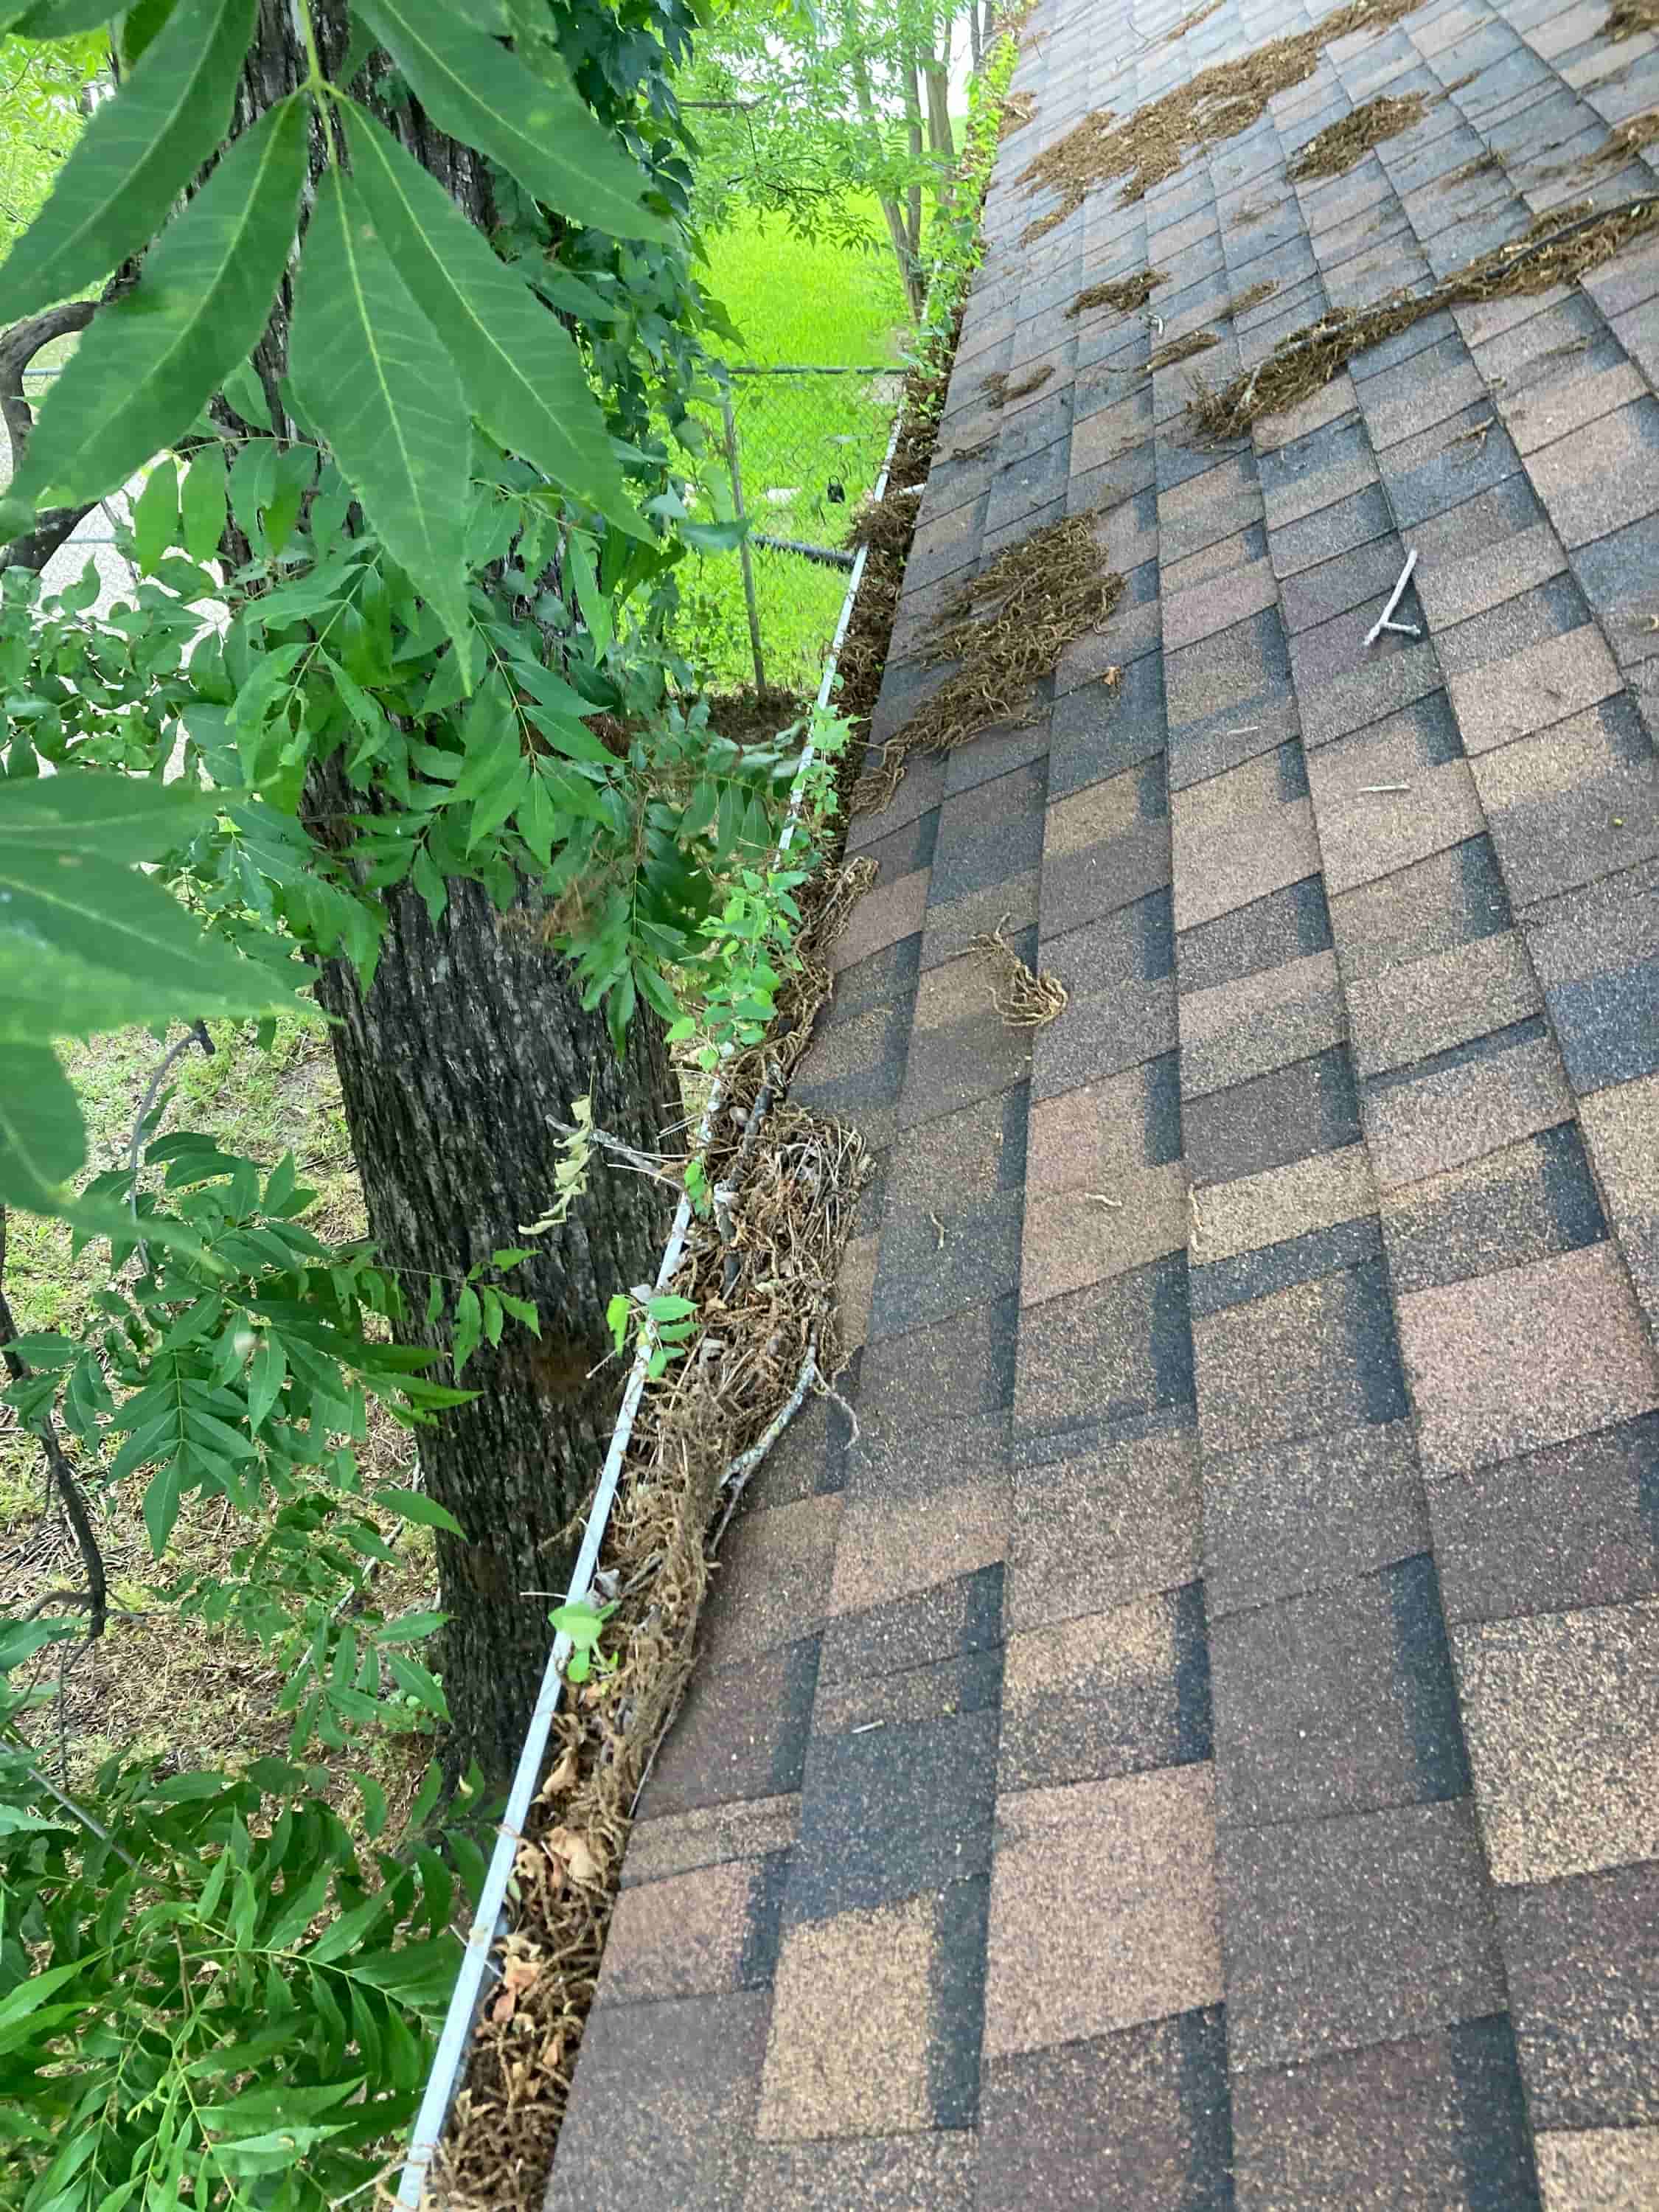 how much is gutter cleaning service